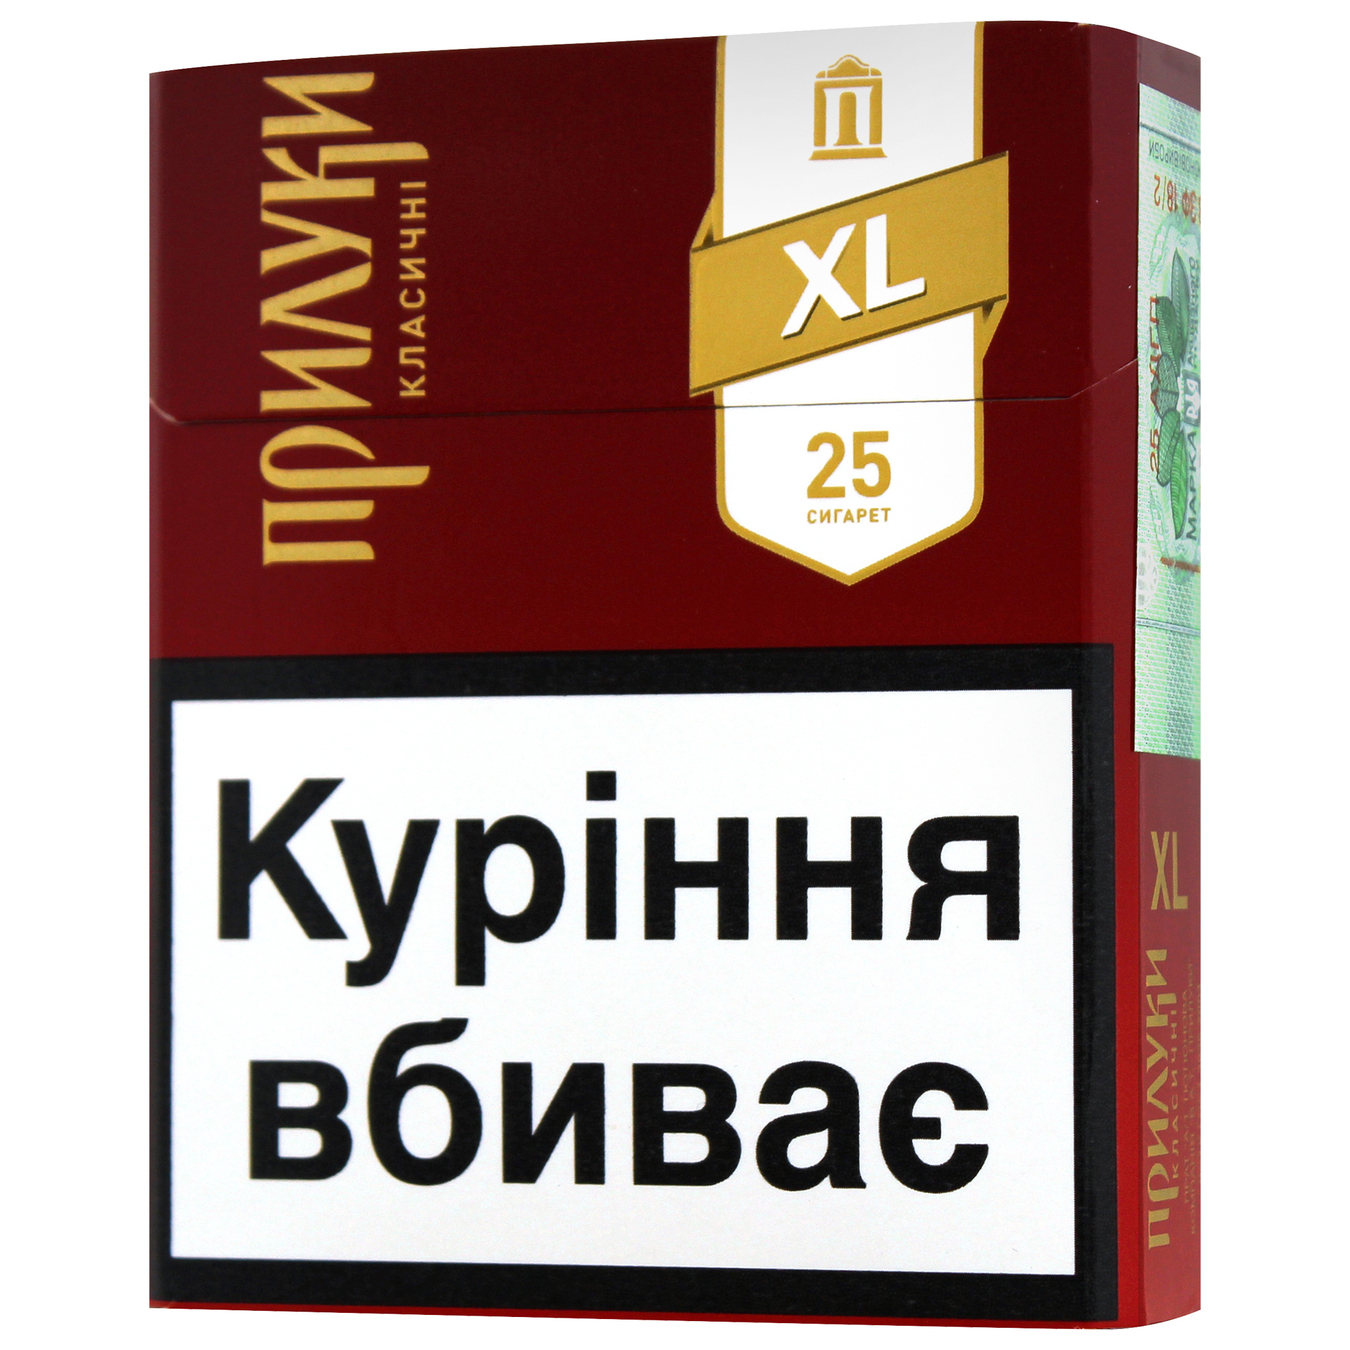 Plyuky Cigarettes Classic XL 25 pcs (the price is indicated without excise tax) 5